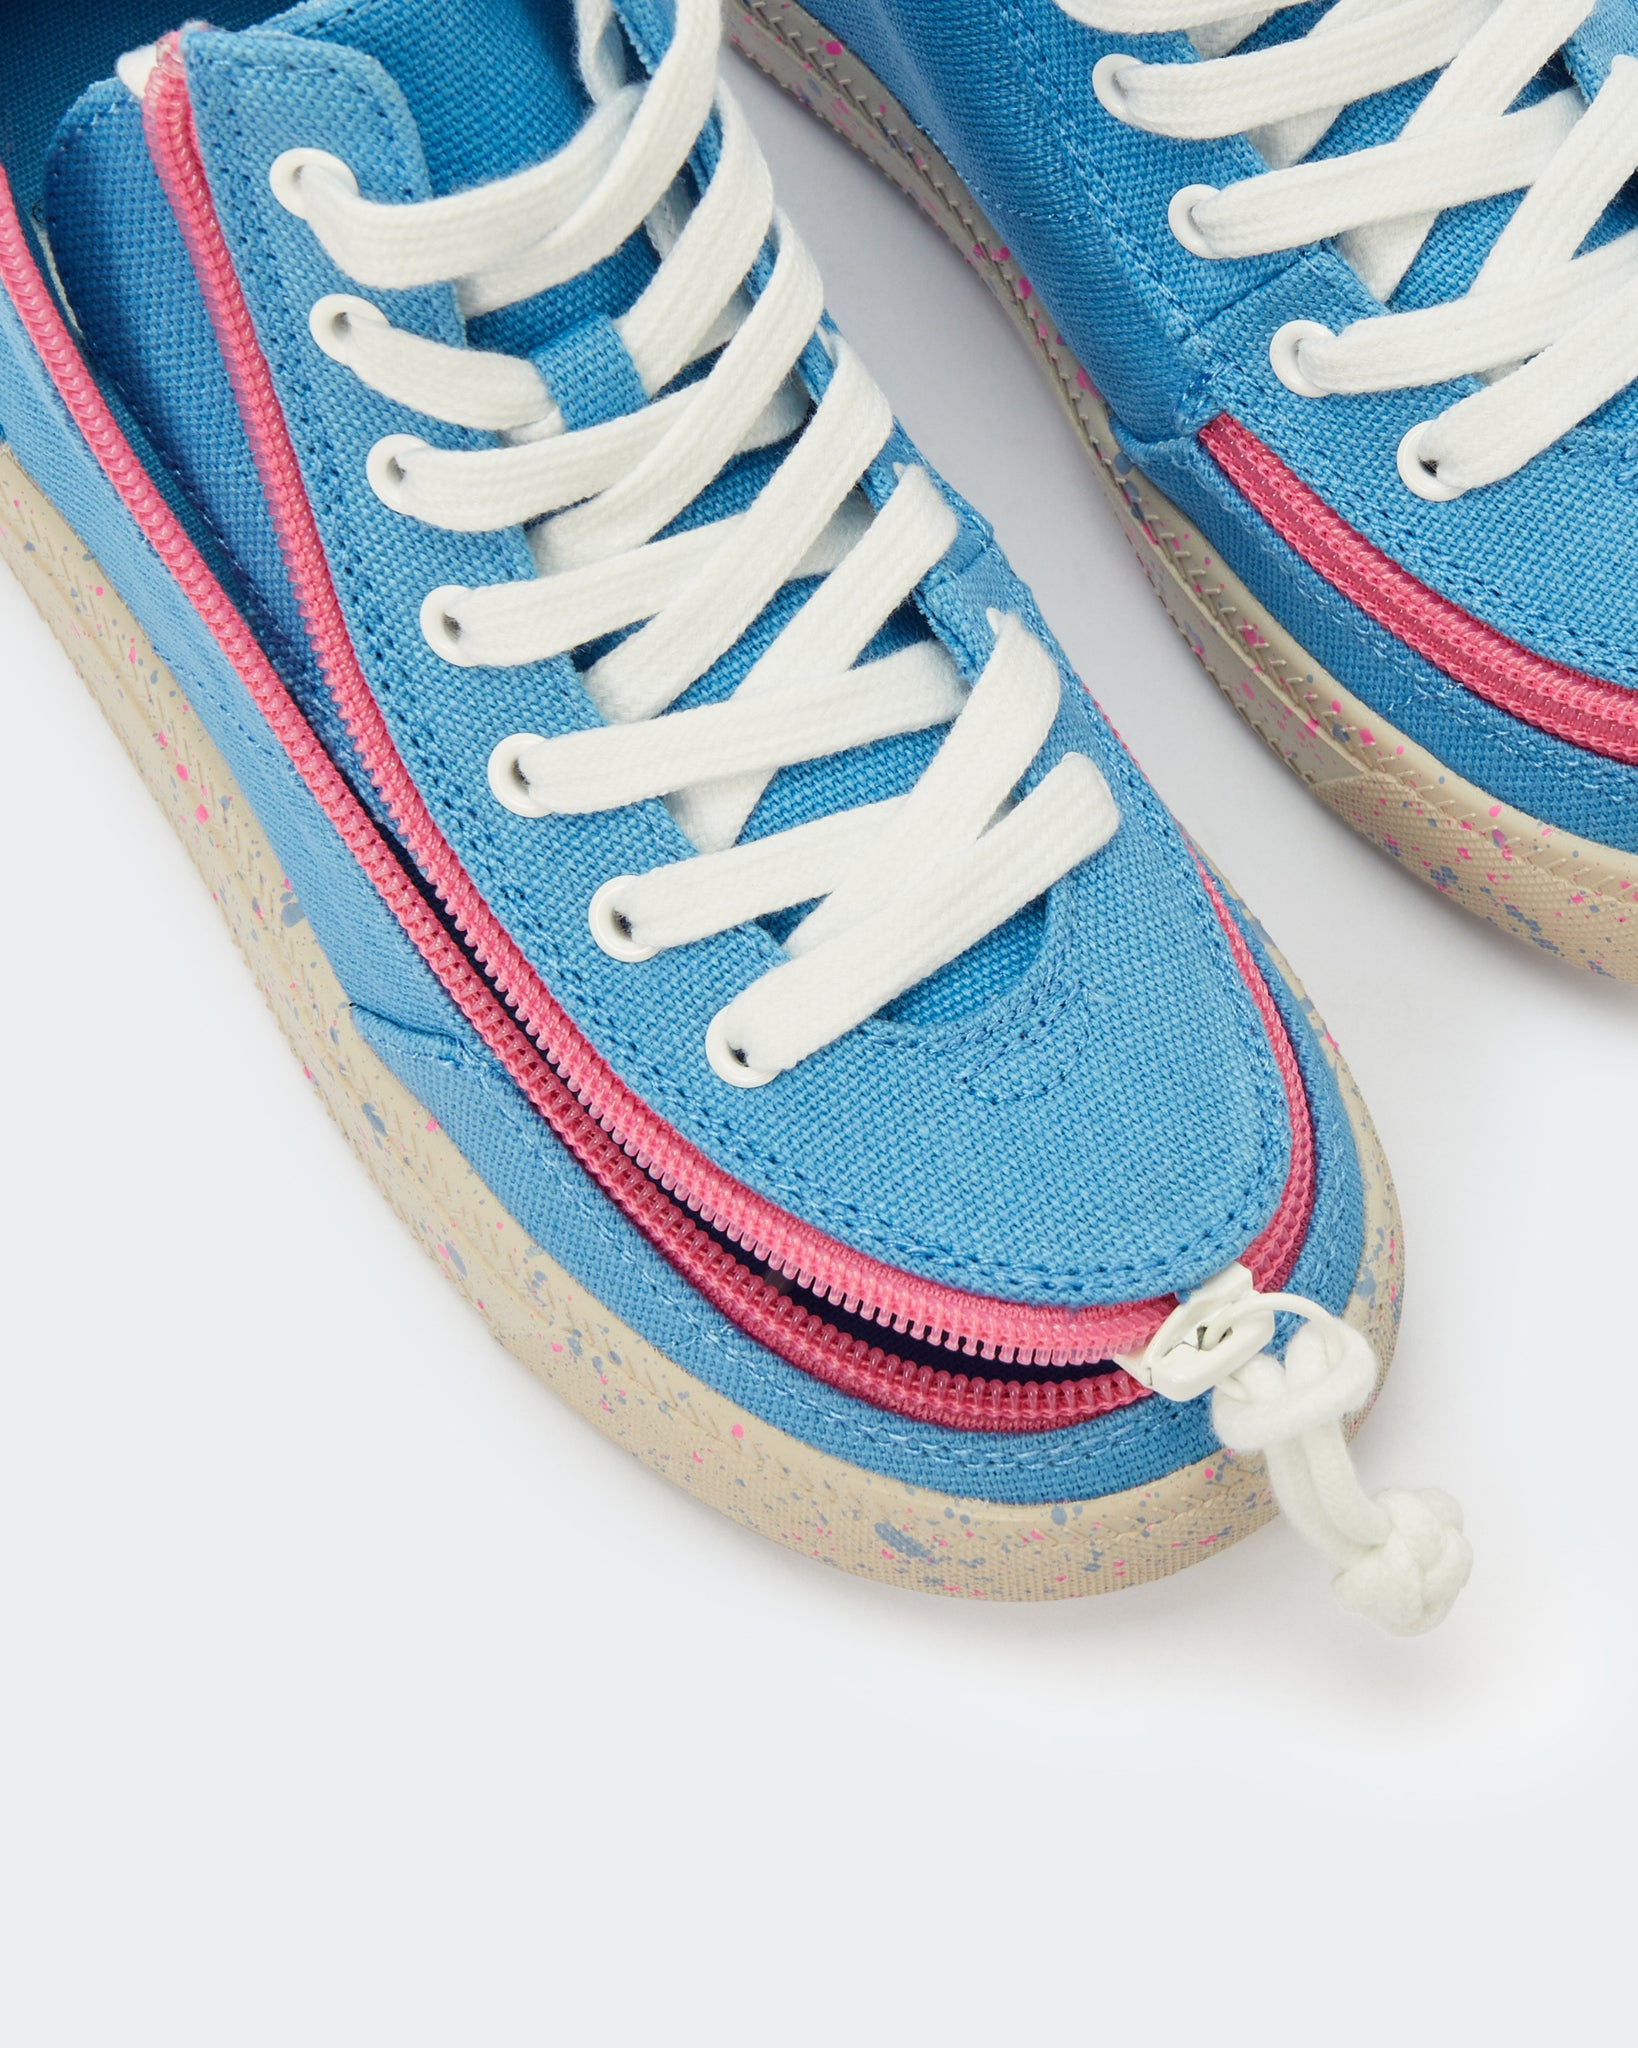 Classic High Top (Toddler) - Blue/Pink Speckle